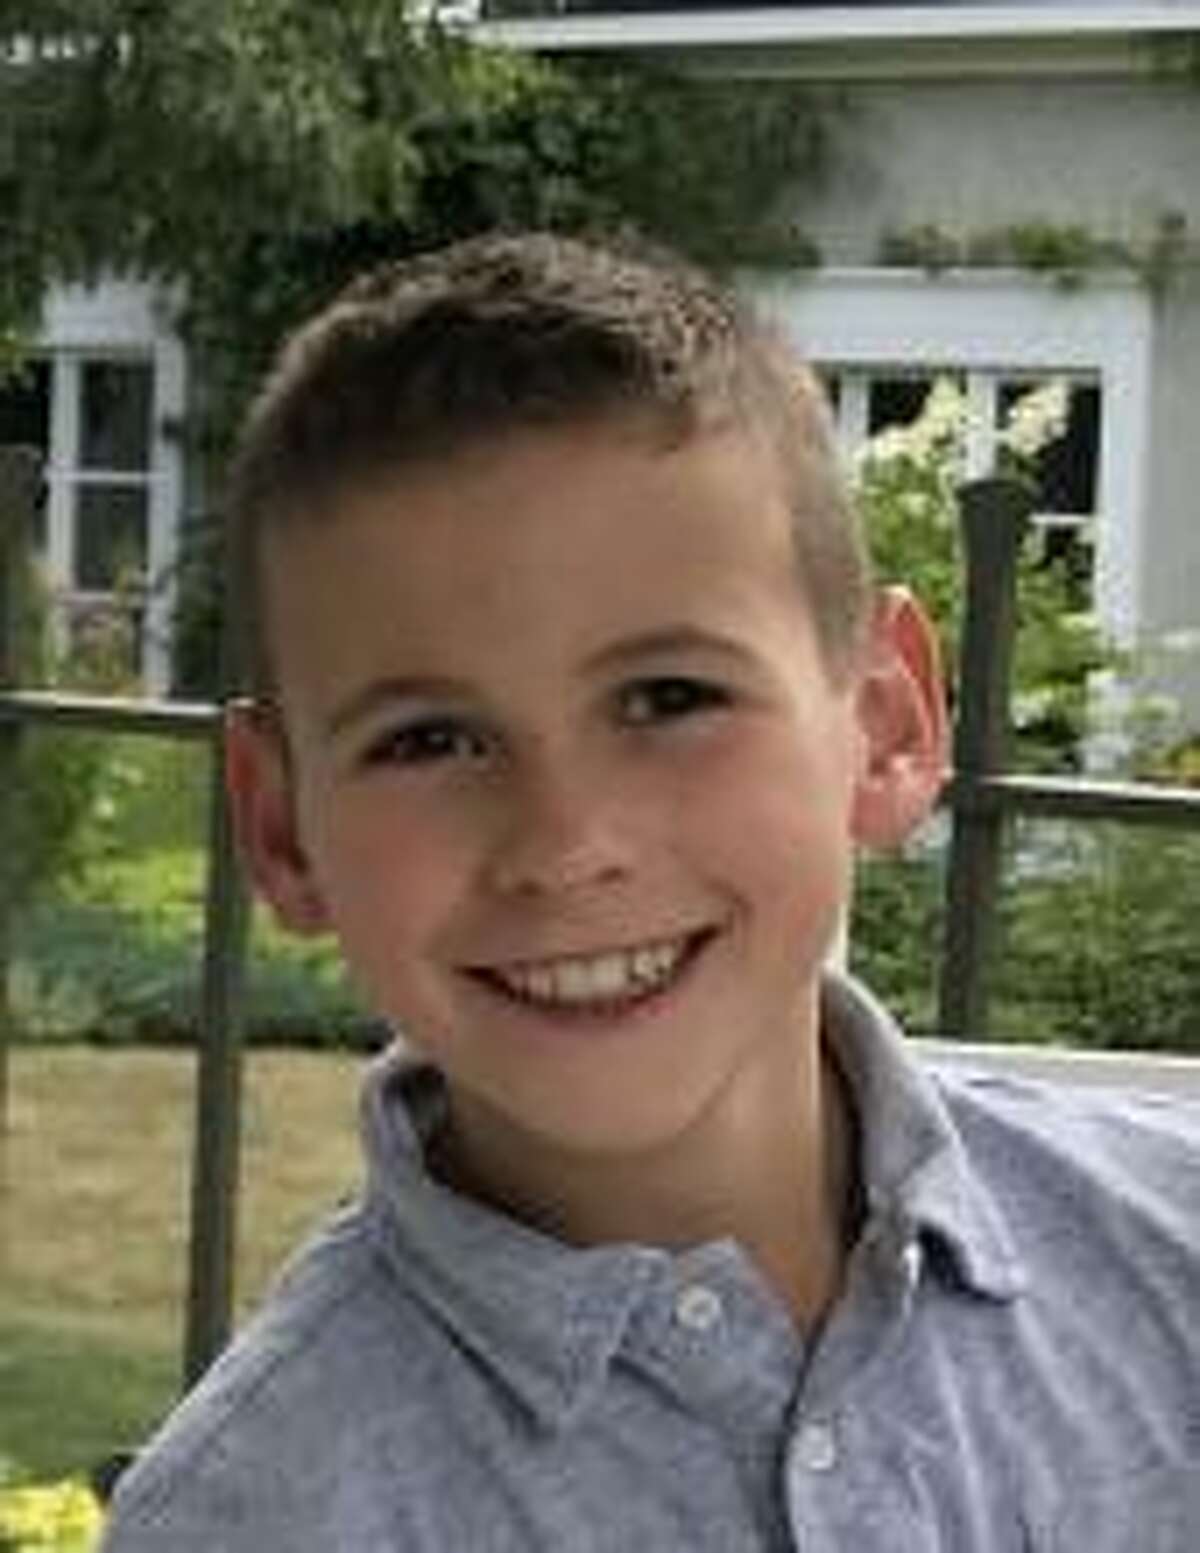 Tristan Barhorst, 10, was died June 12, 2020 after being hit by a vehicle operated by a teenaged driver, as he crossed the street after making a purchase from an ice cream truck.